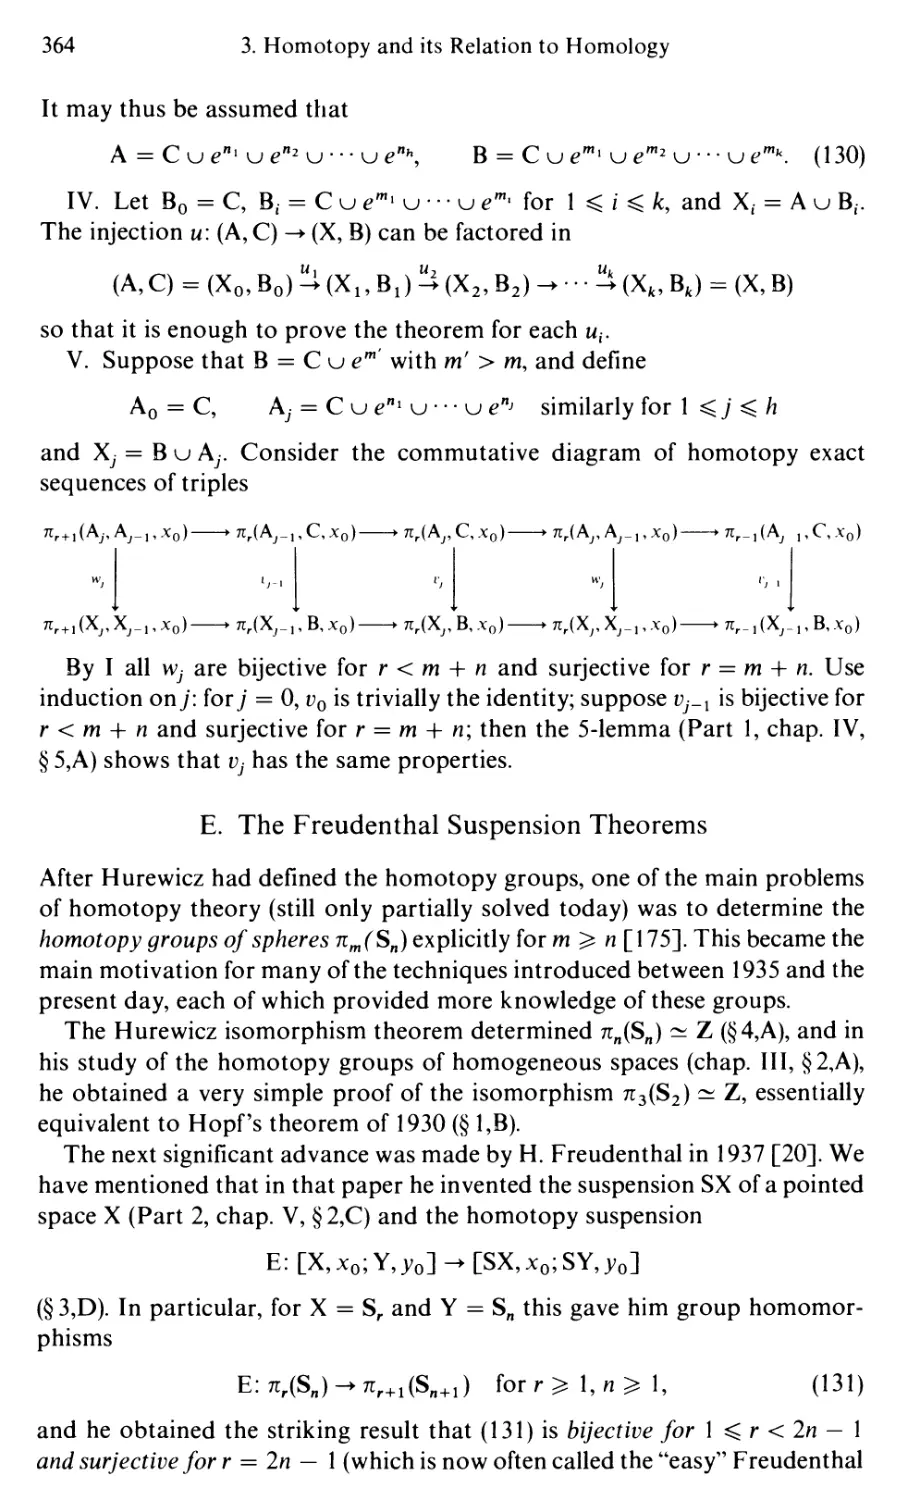 E. The Freudenthal Suspension Theorems